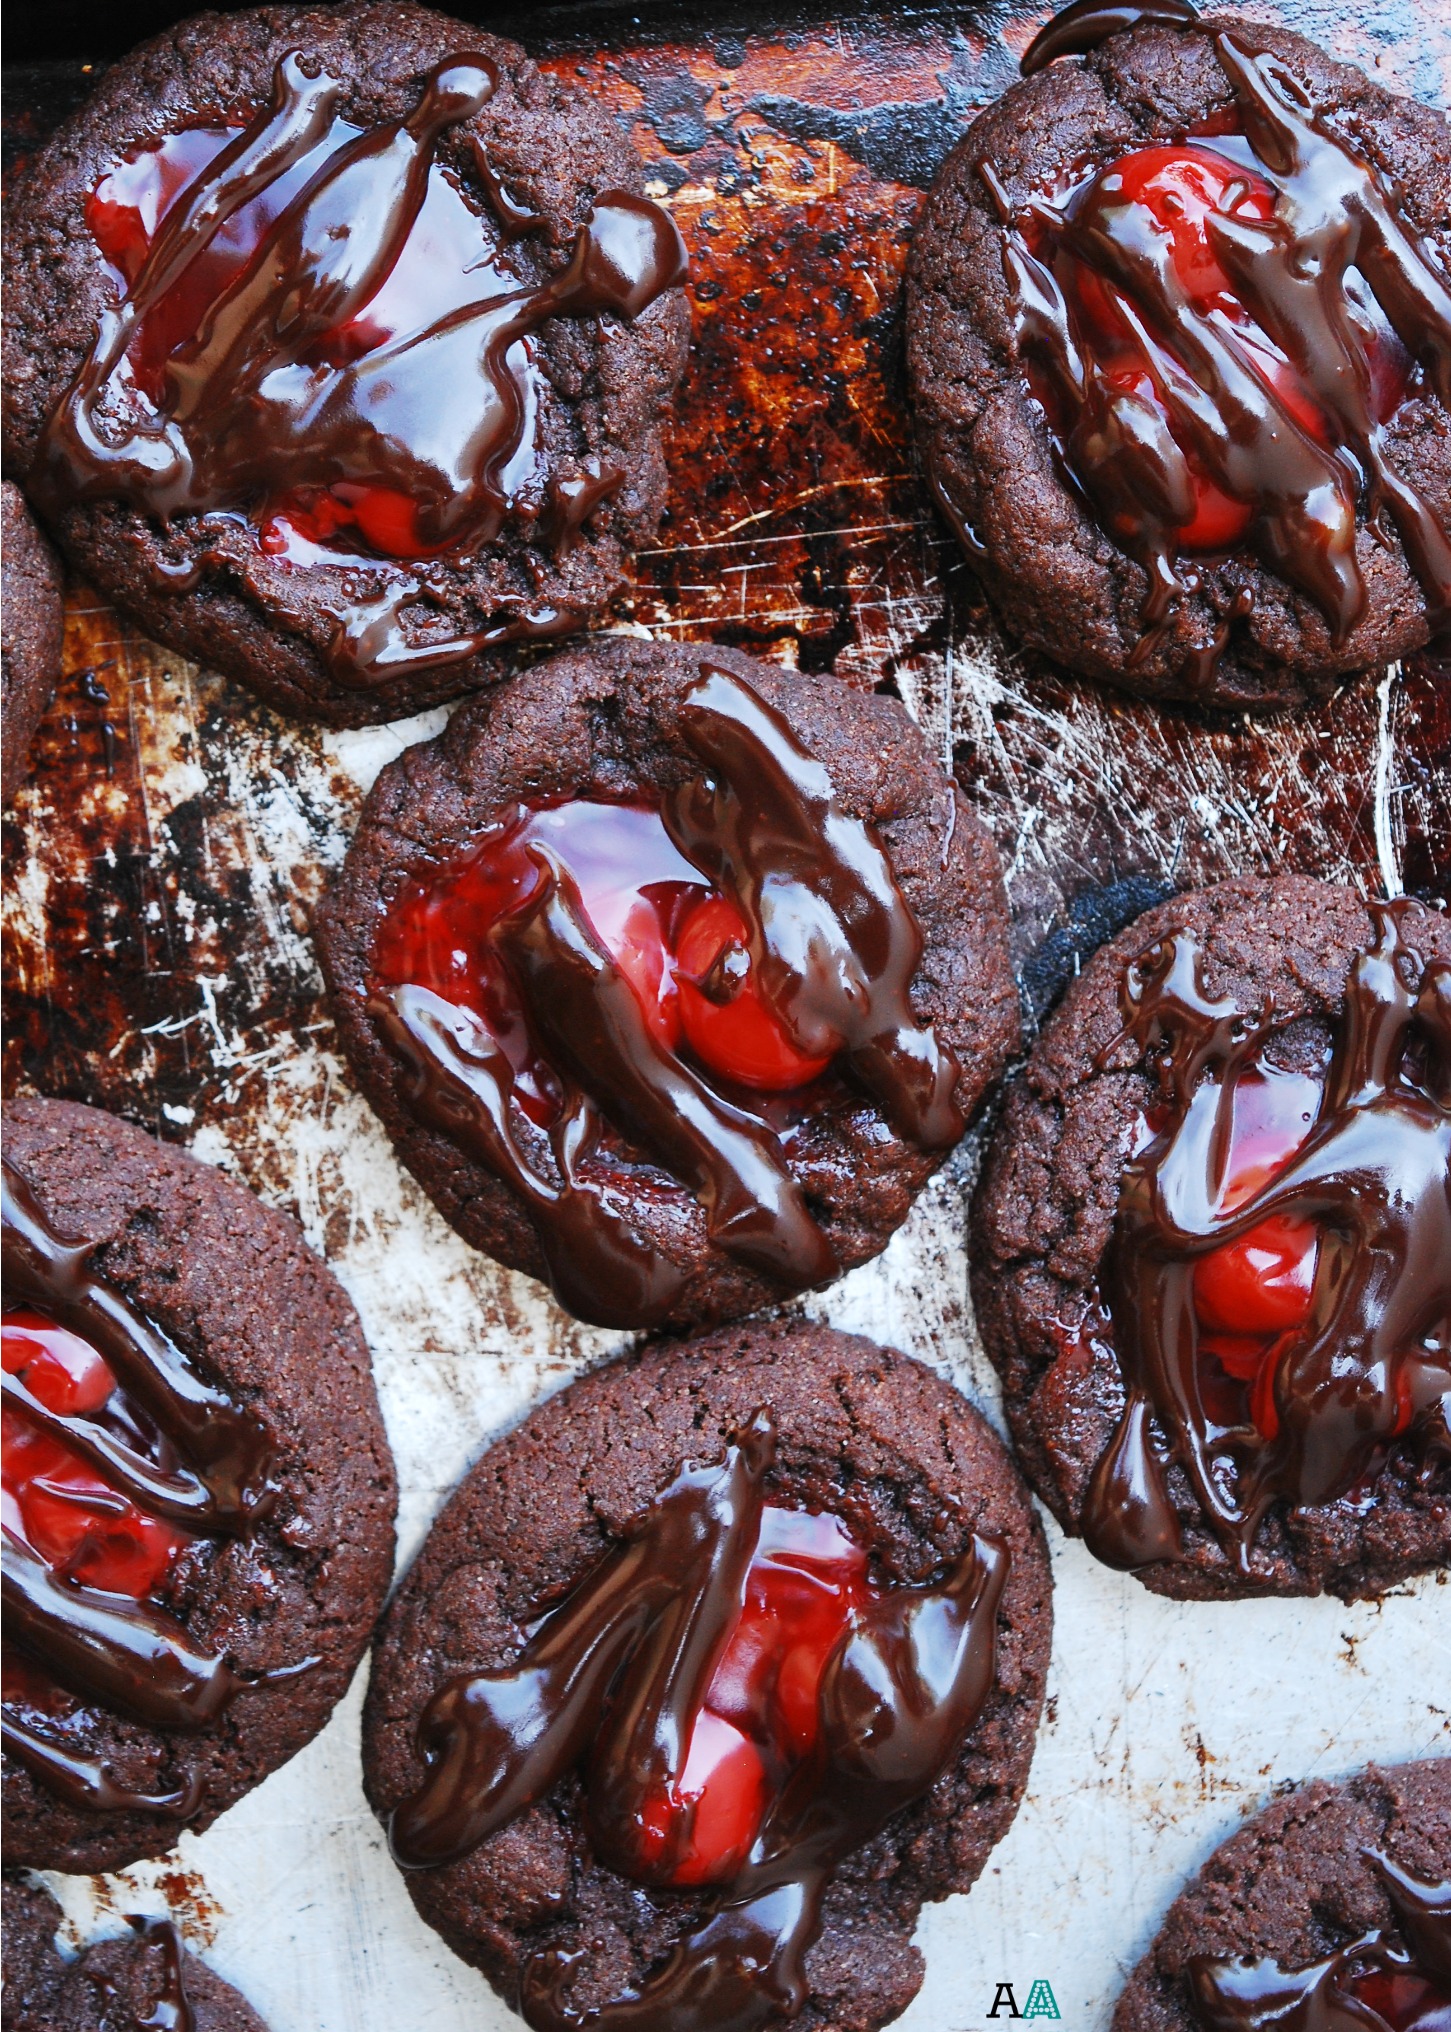 Cherry Chocolate Thumbprint Cookies (GF, DF, Egg, Soy, Peanut, Tree nut Free, Top 8 Free, Vegan) by Allergy Awesomeness